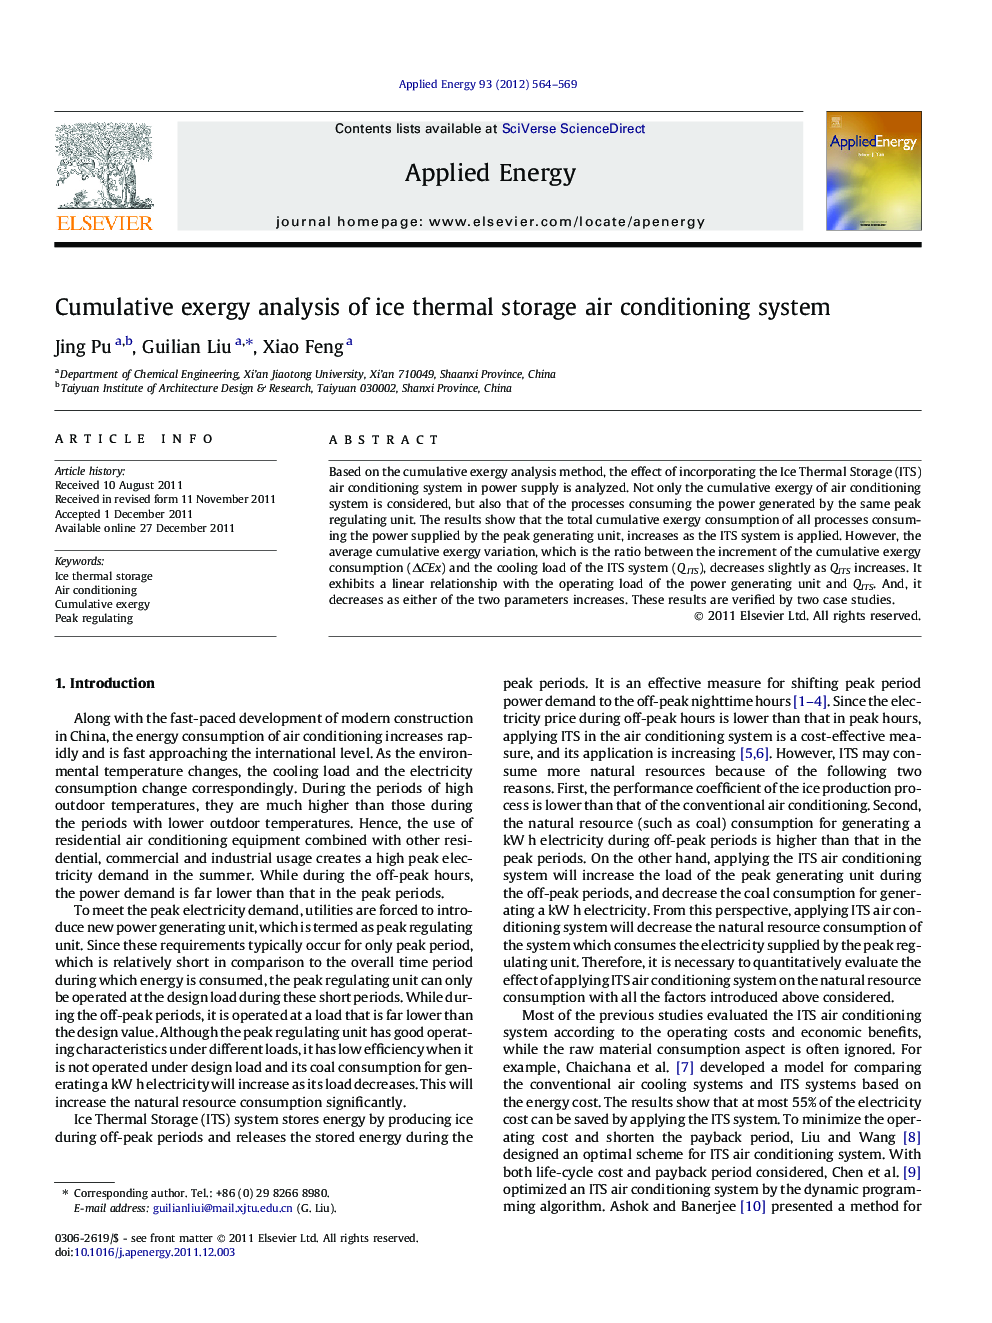 Cumulative exergy analysis of ice thermal storage air conditioning system